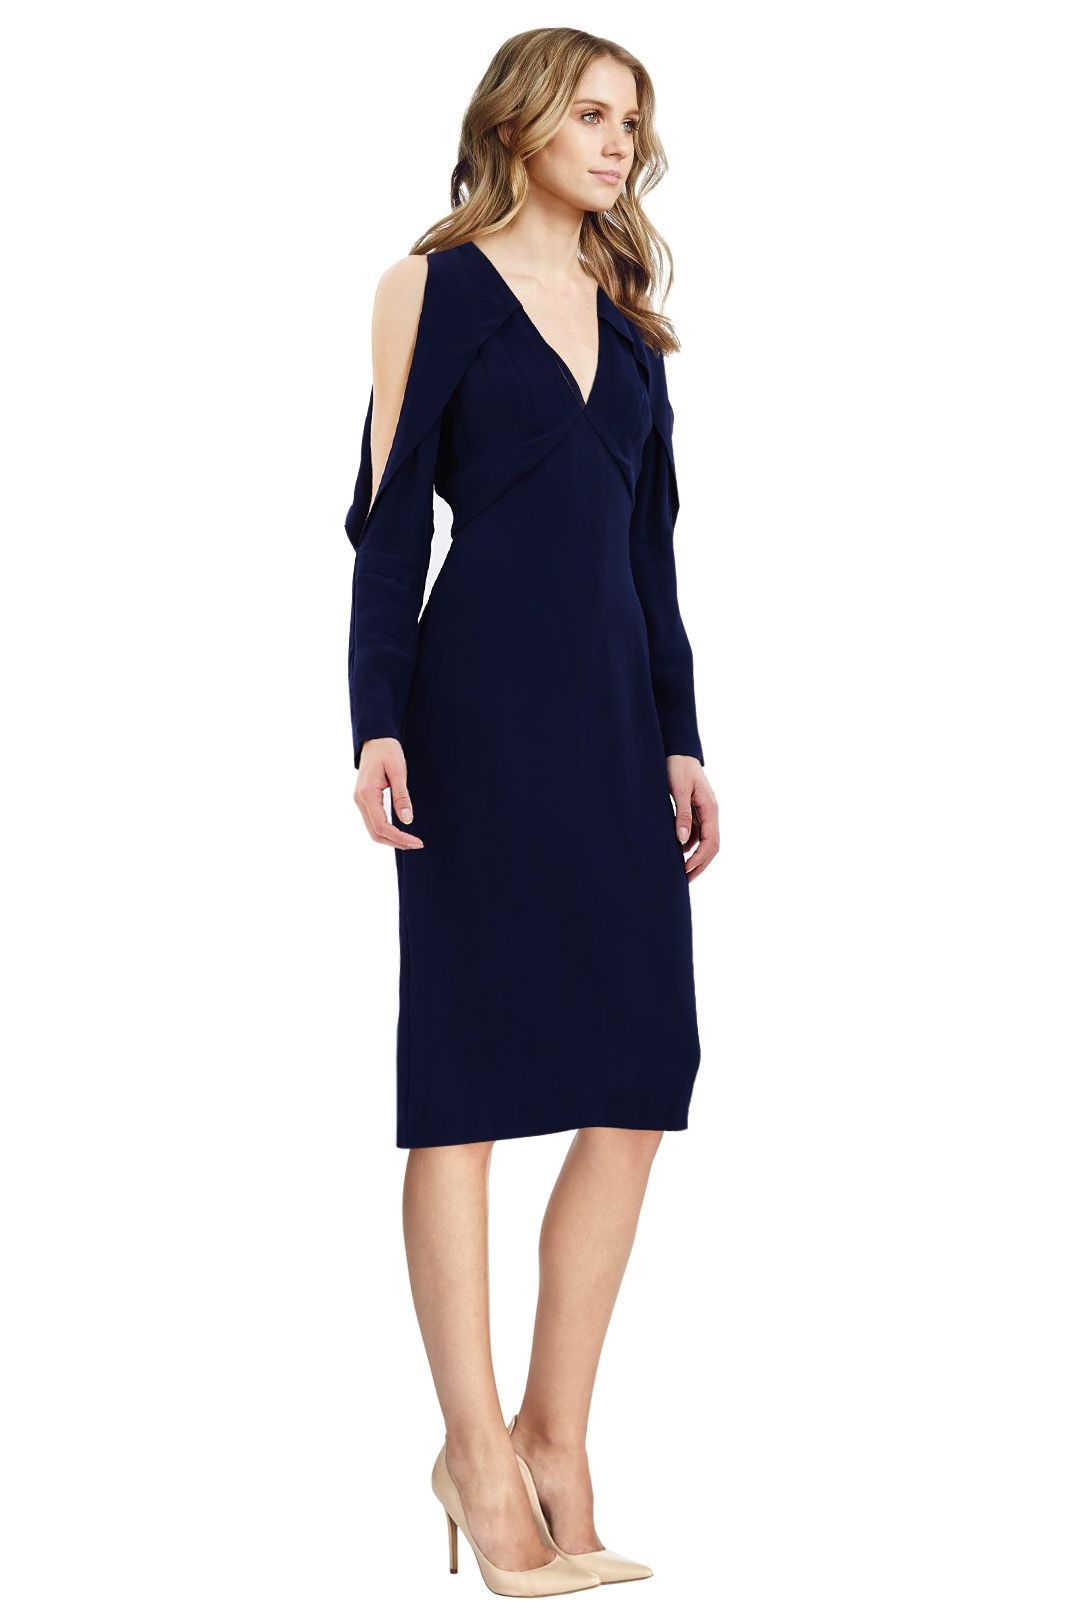 C/MEO Collective - Do It Now Dress - Blue - Side